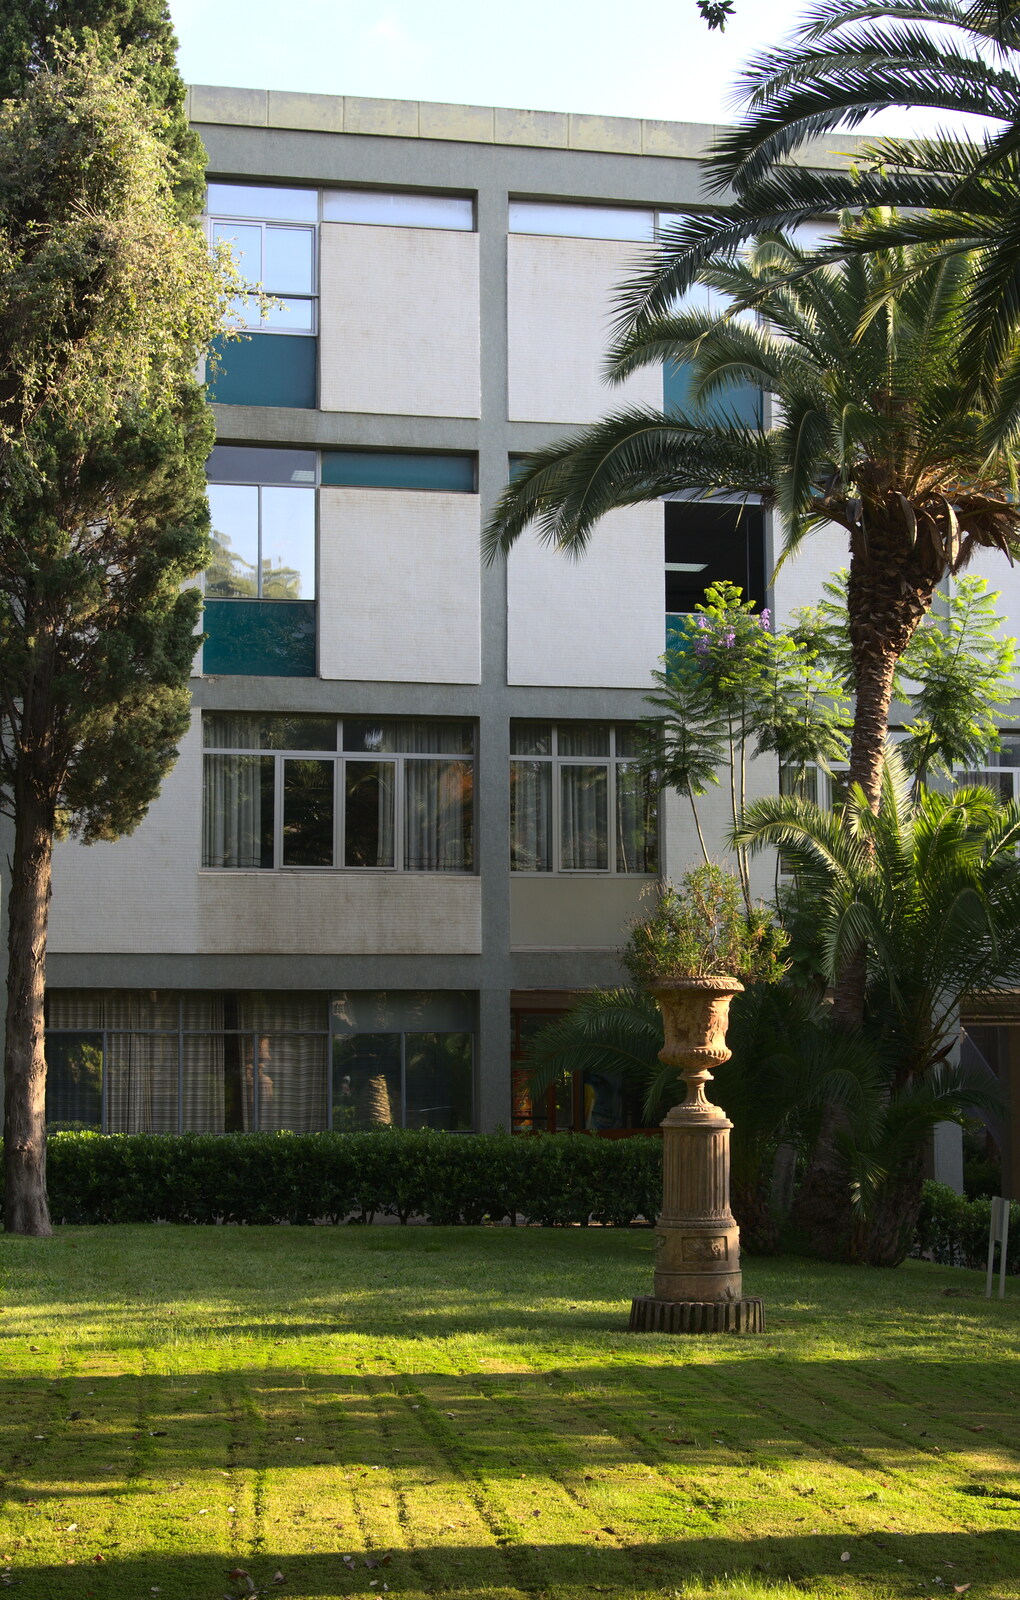 The 1960s/70s 'cubist' style of the accomodation  from The Open Education Challenge, Barcelona, Catalonia - 13th July 2014